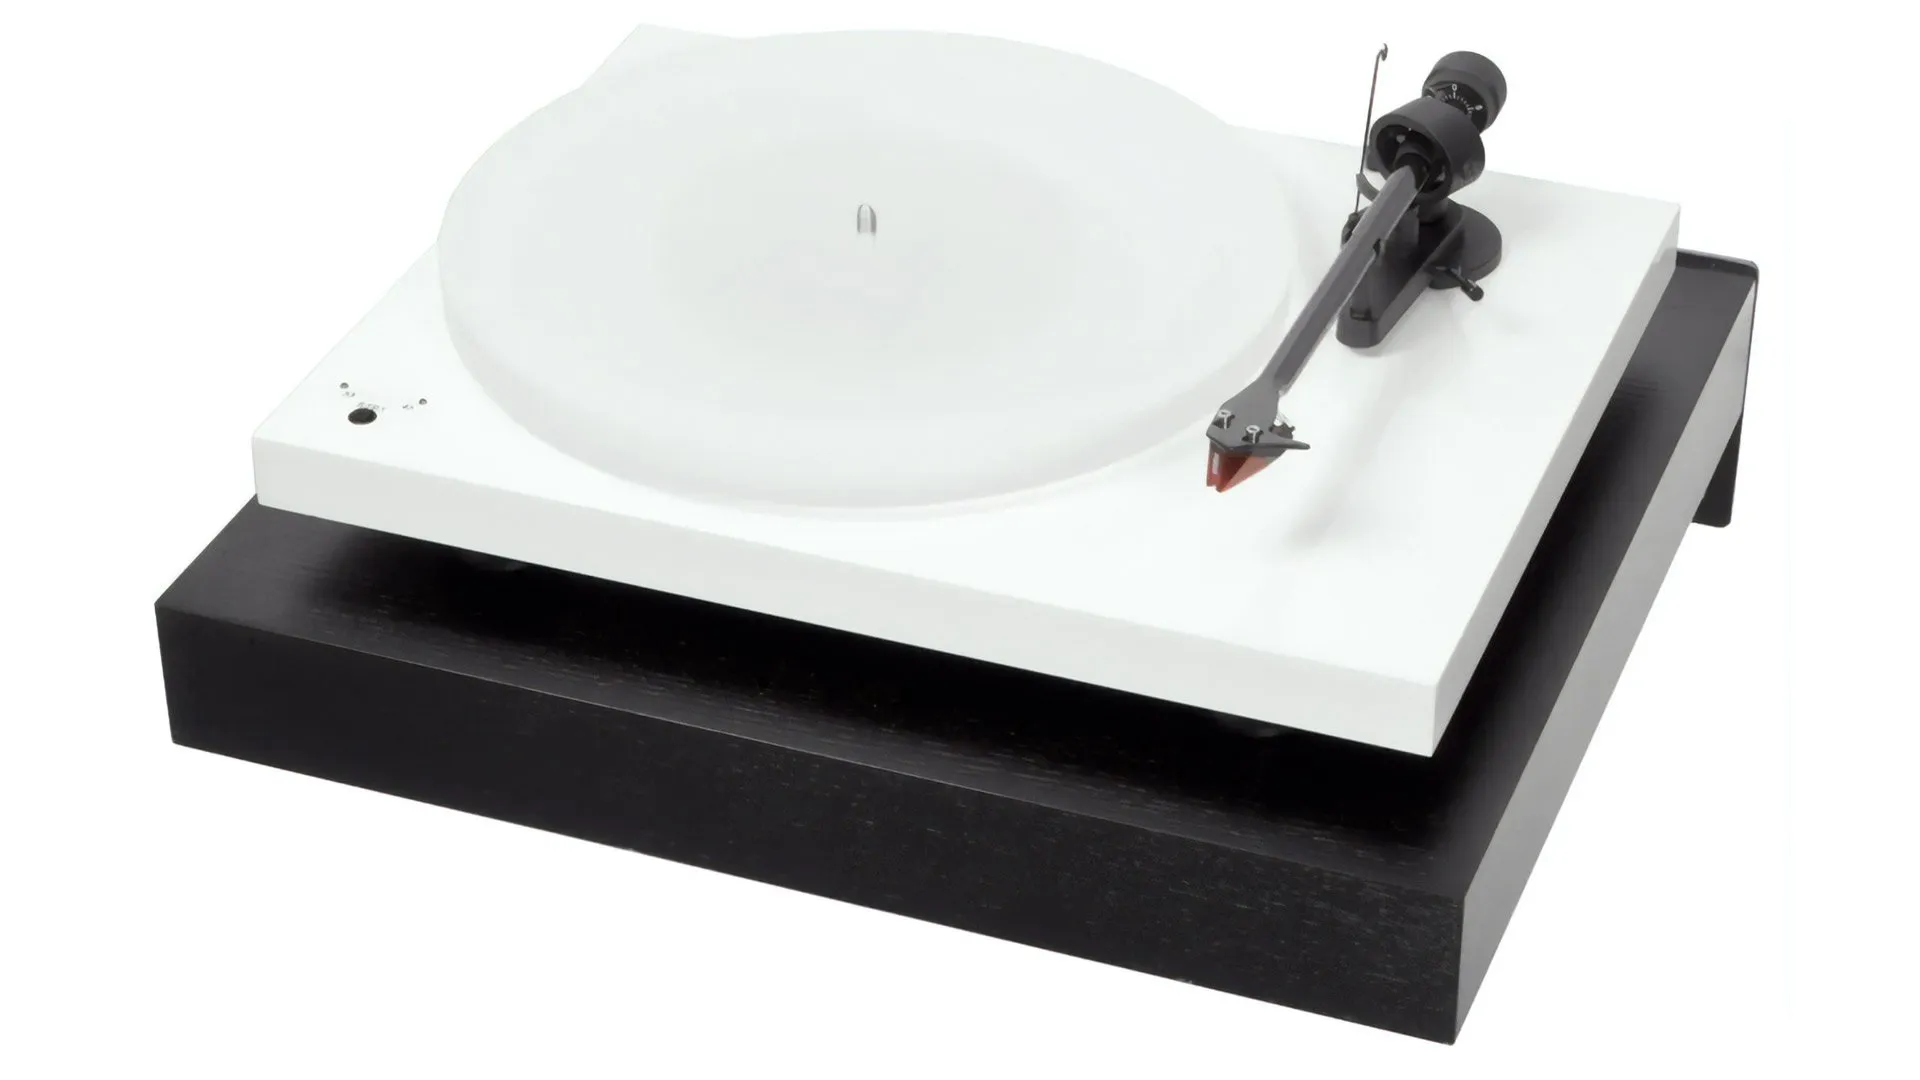 Pro-Ject Audio Systems Wall Mount it 5 Turntable Wall Shelf - Black with Debut Carbon Turntable